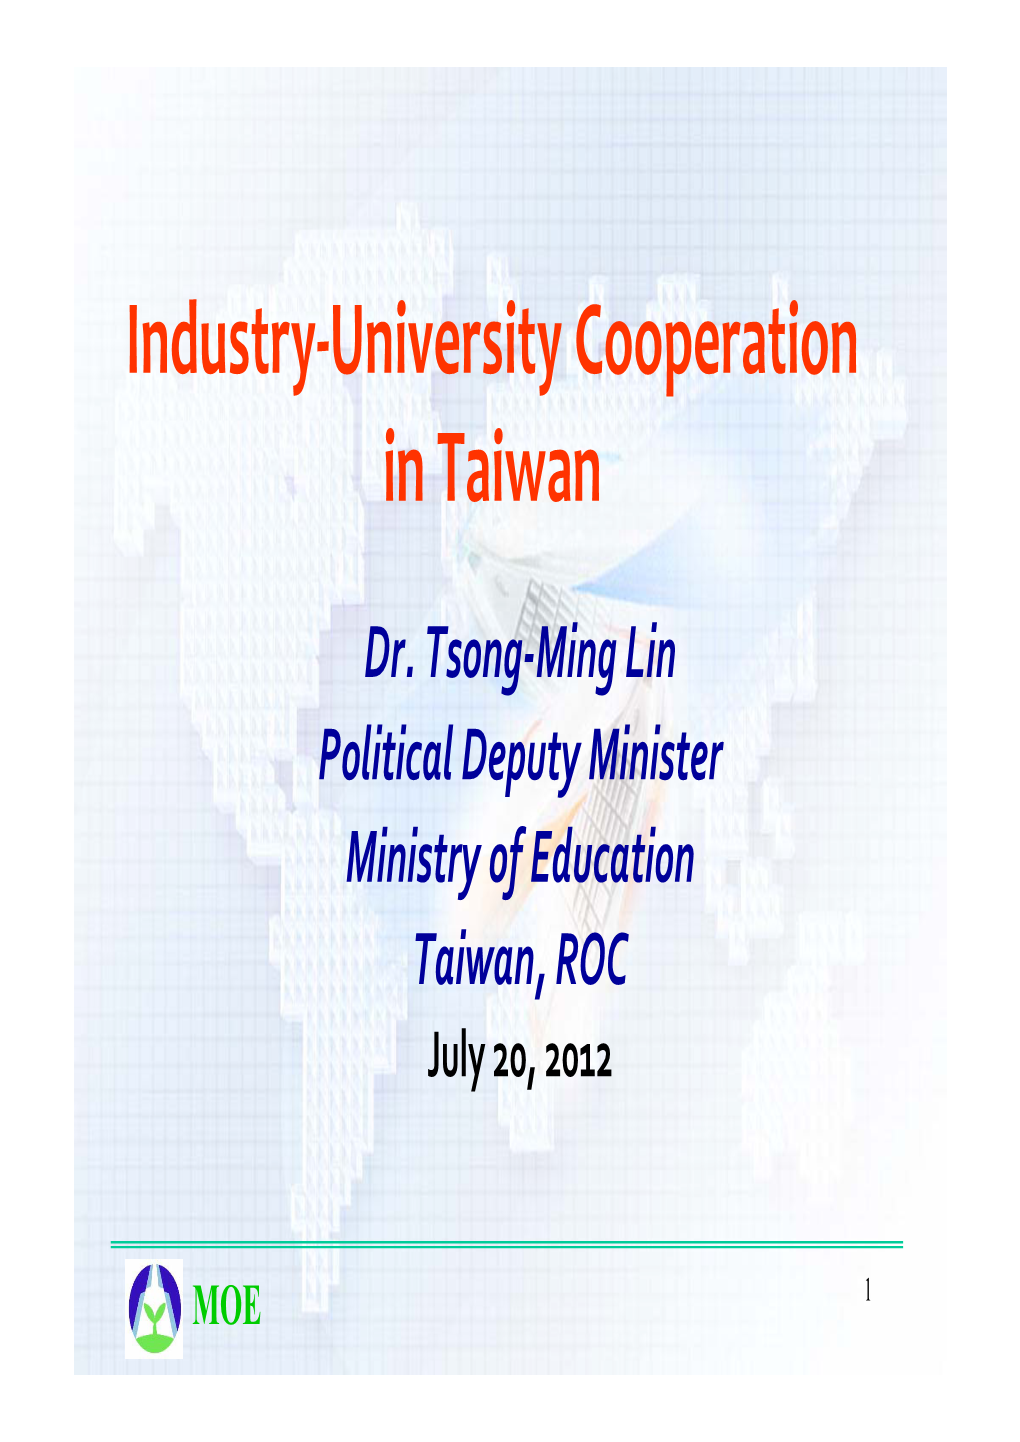 Industry-University Cooperation in Taiwan